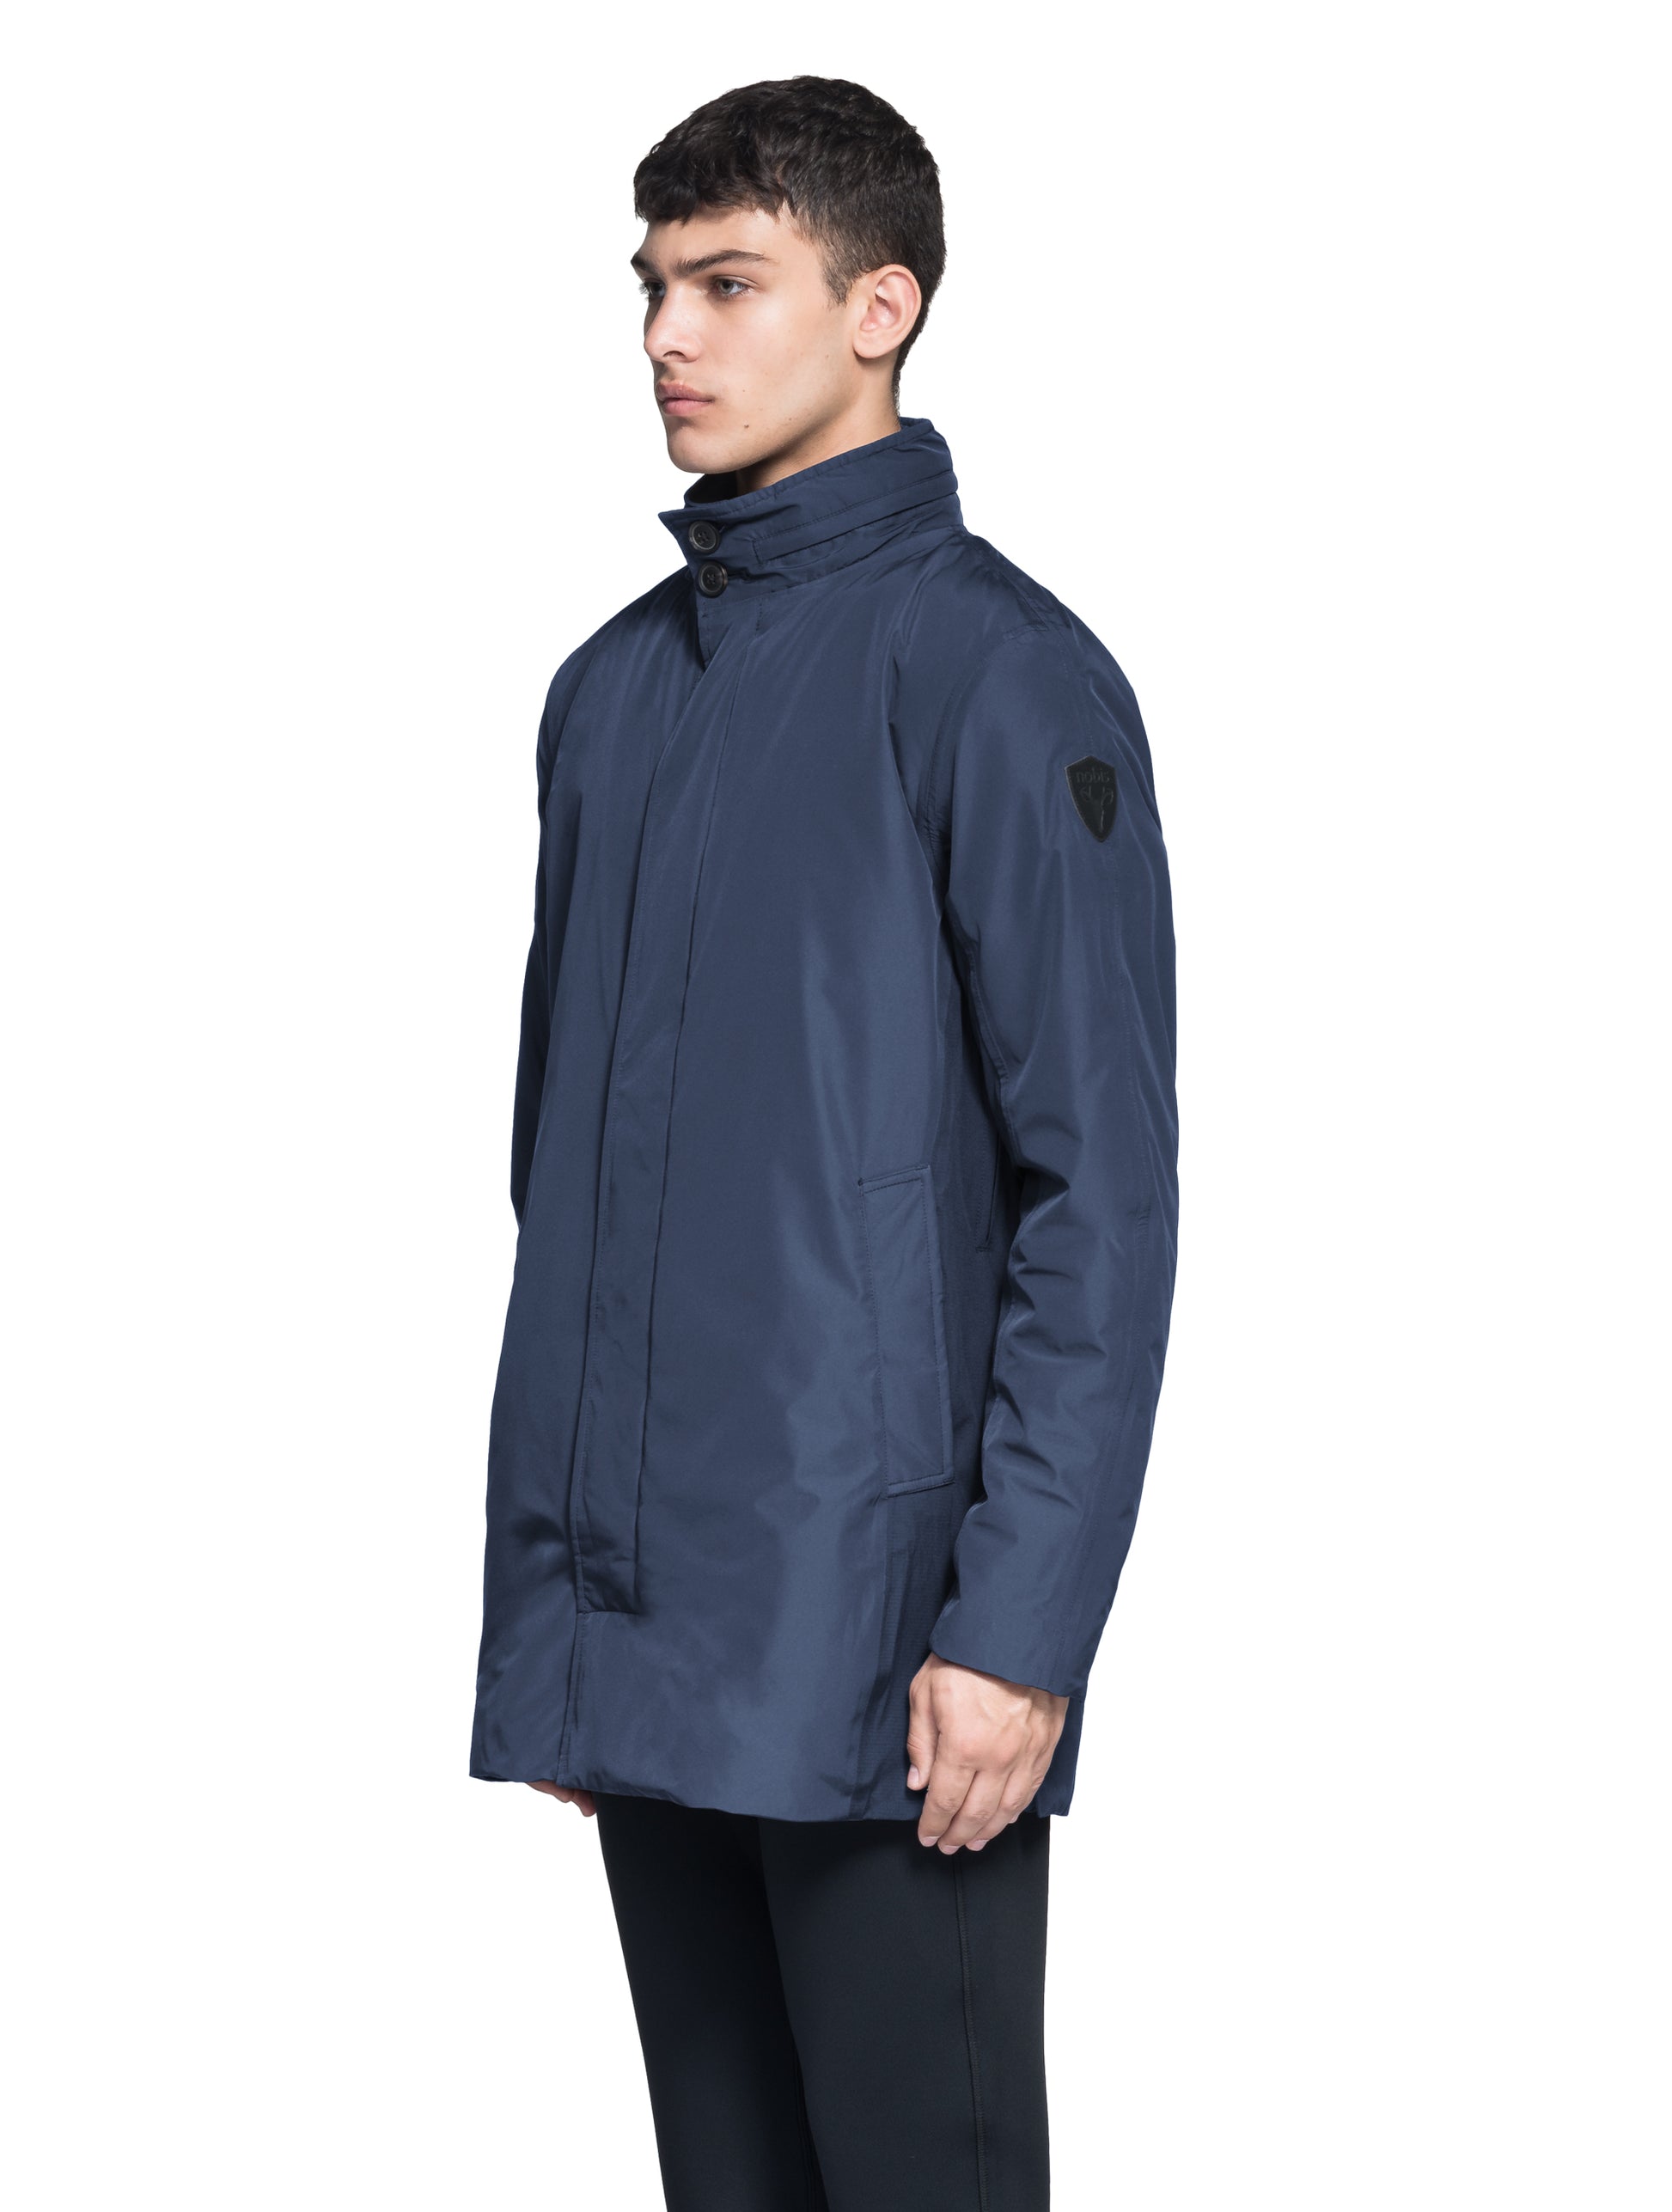 Pike Men's Tailored Mac Coat in thigh length, premium 3-ply Micro Denier fabrication at body and cire technical nylon taffeta fabrication at hood, premium 4-way stretch, water resistant Primaloft Gold Insulation Active+, hidden 2-way zipper with snap closure wind flap, single welt pockets with magnetic closure at waist, hidden snap placket at cuffs, pit zippers for ventilation, interior zipper pocket at right chest, and interior button pocket at left chest, in Marine